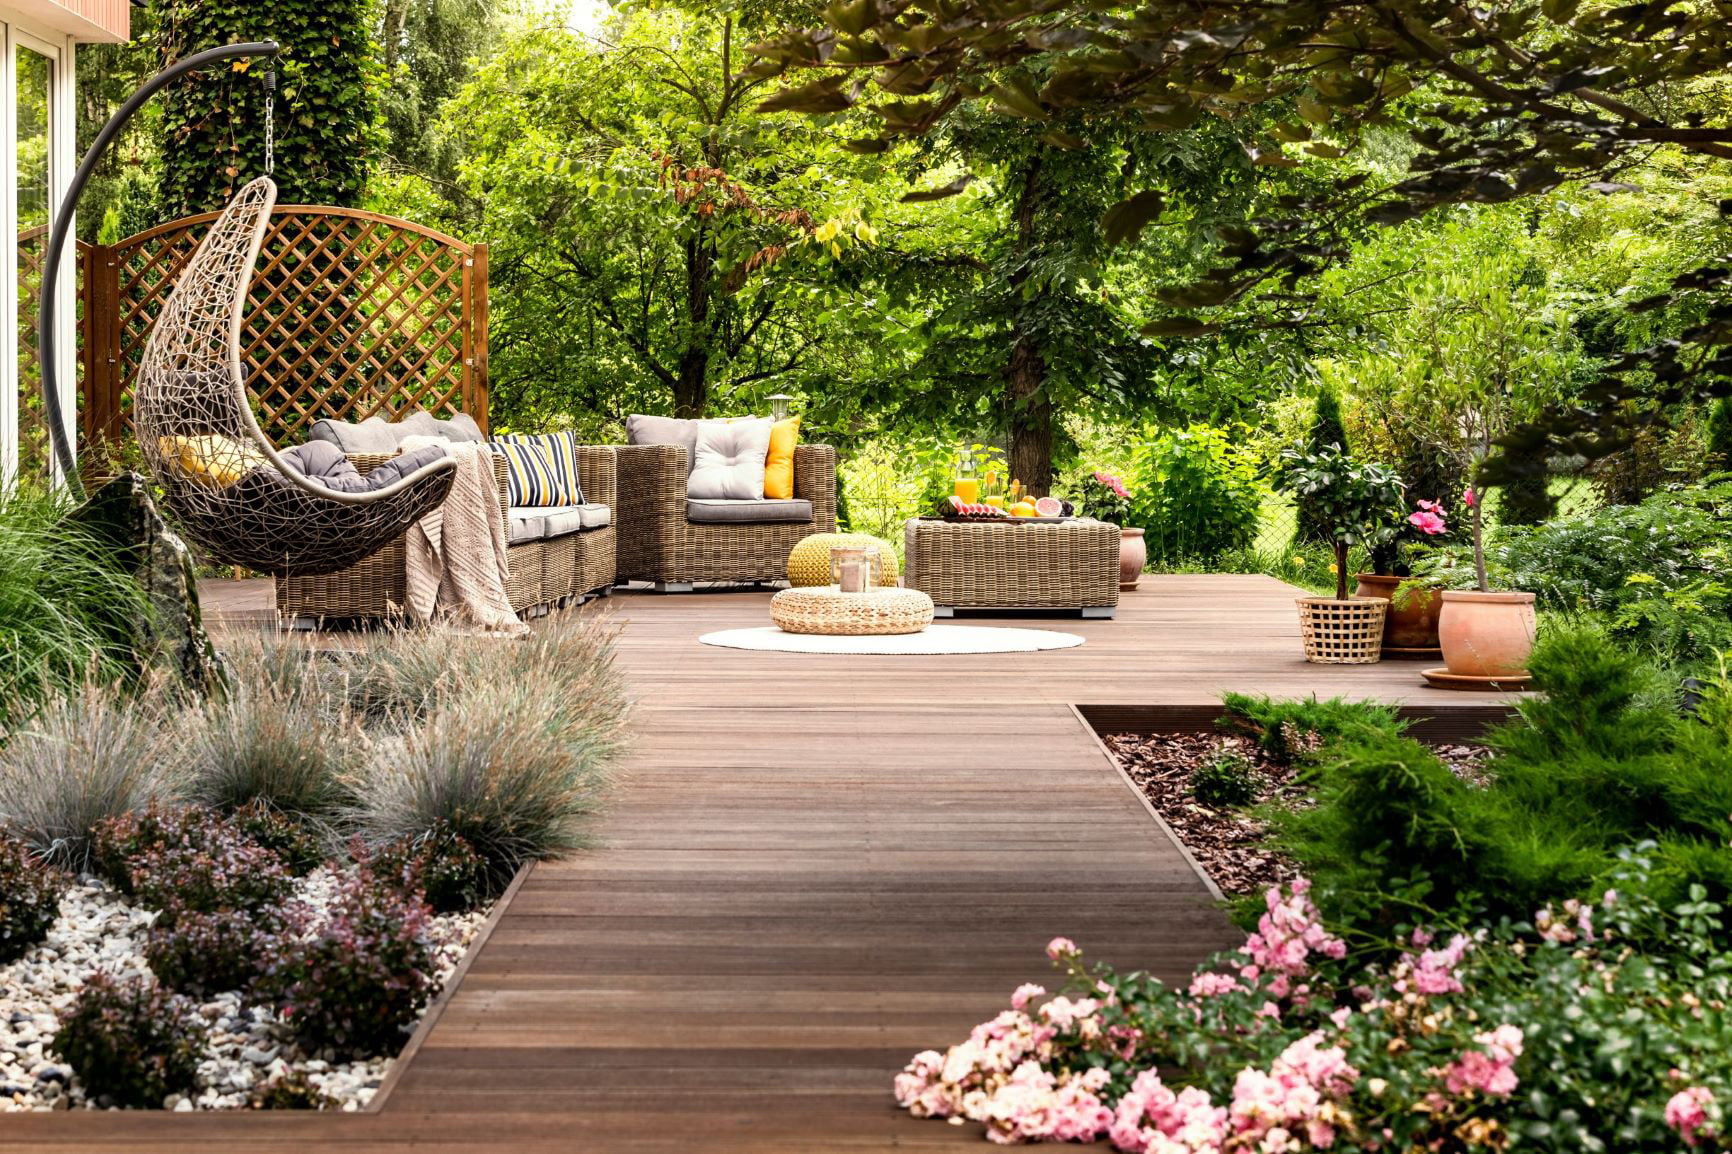 Unique Landscaping Ideas To Consider For Your Home – Forbes Advisor